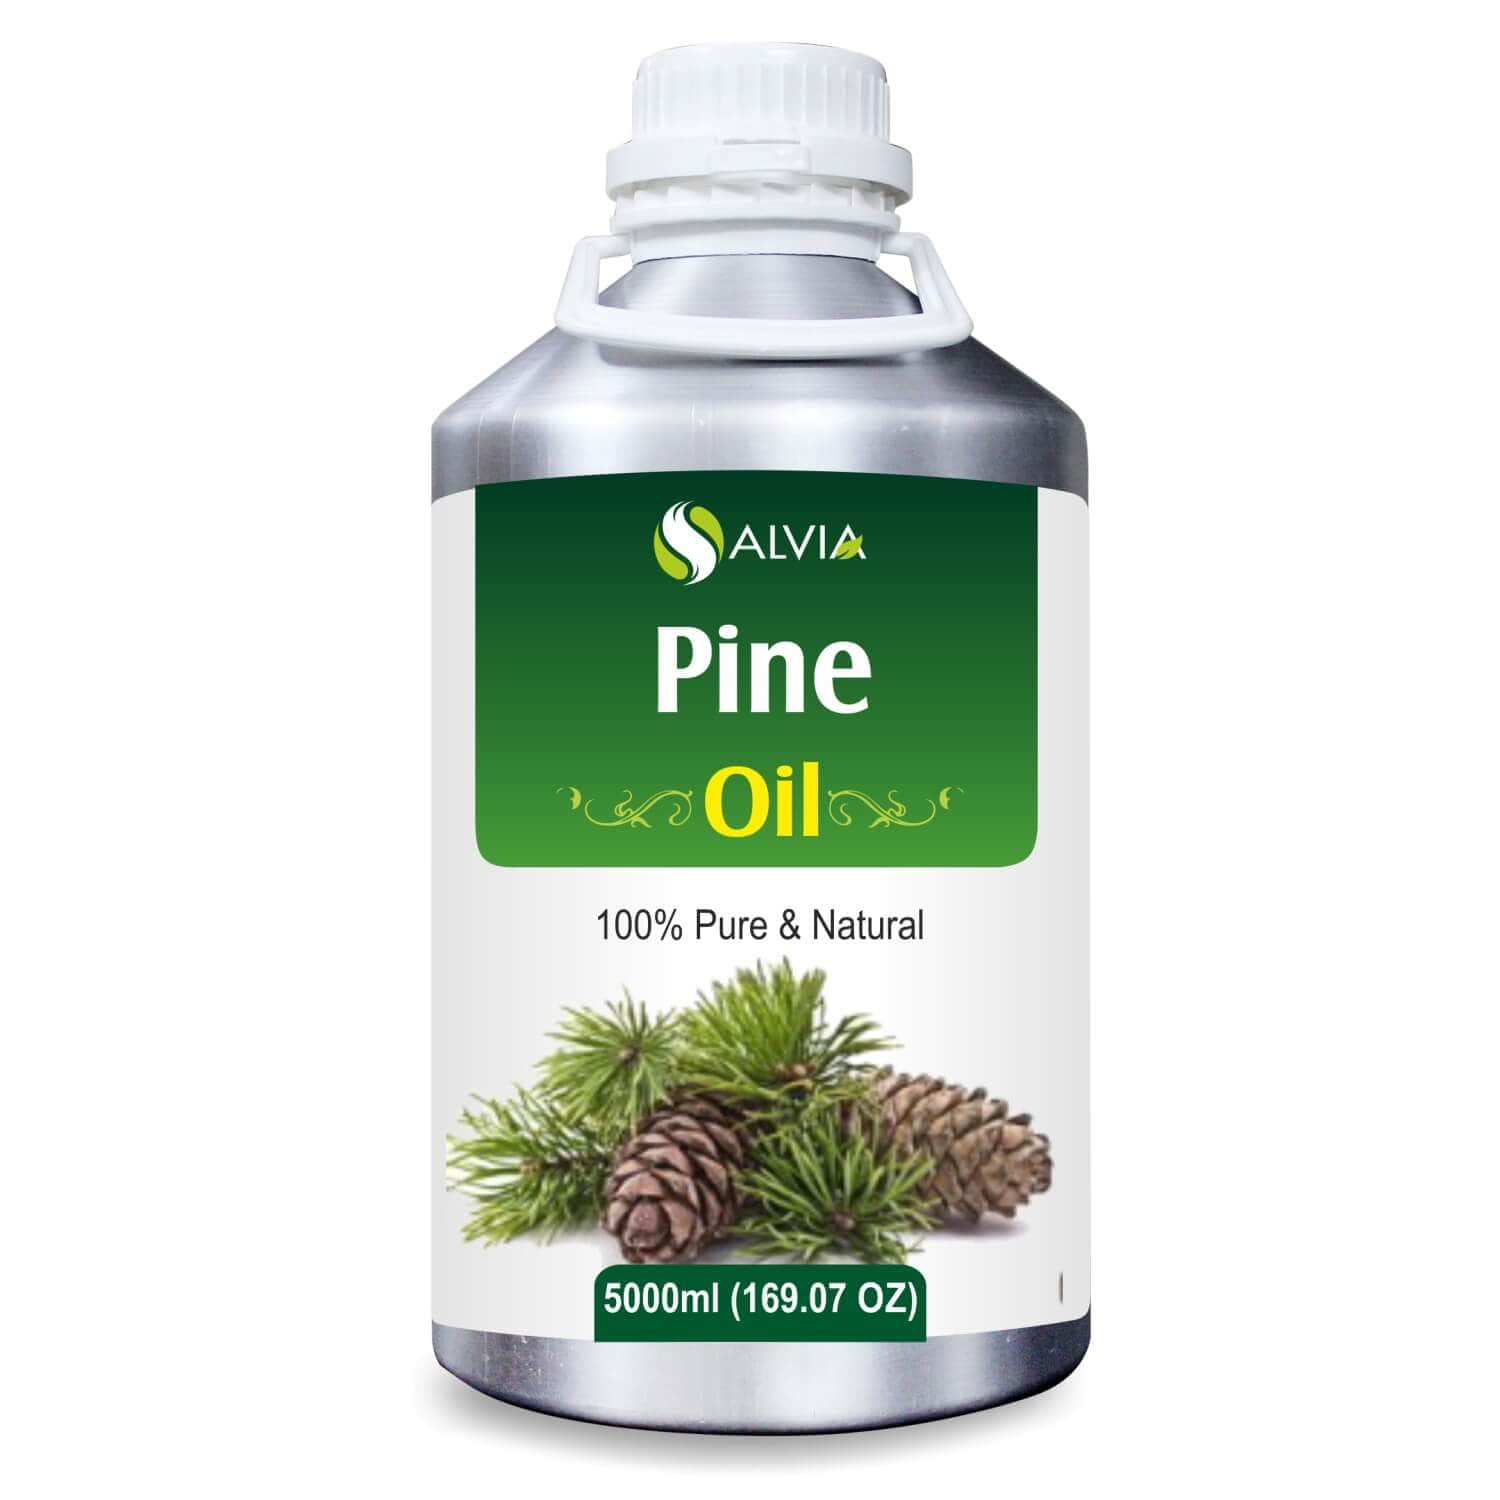 Salvia Natural Essential Oils 5000ml Pine Oil (Pinus sylvestris) 100% Natural Pure Essential Oil Increases Hair Growth, Soothes Acne & Skin Irritation, Alleviates Pain, Manages Skin Condition